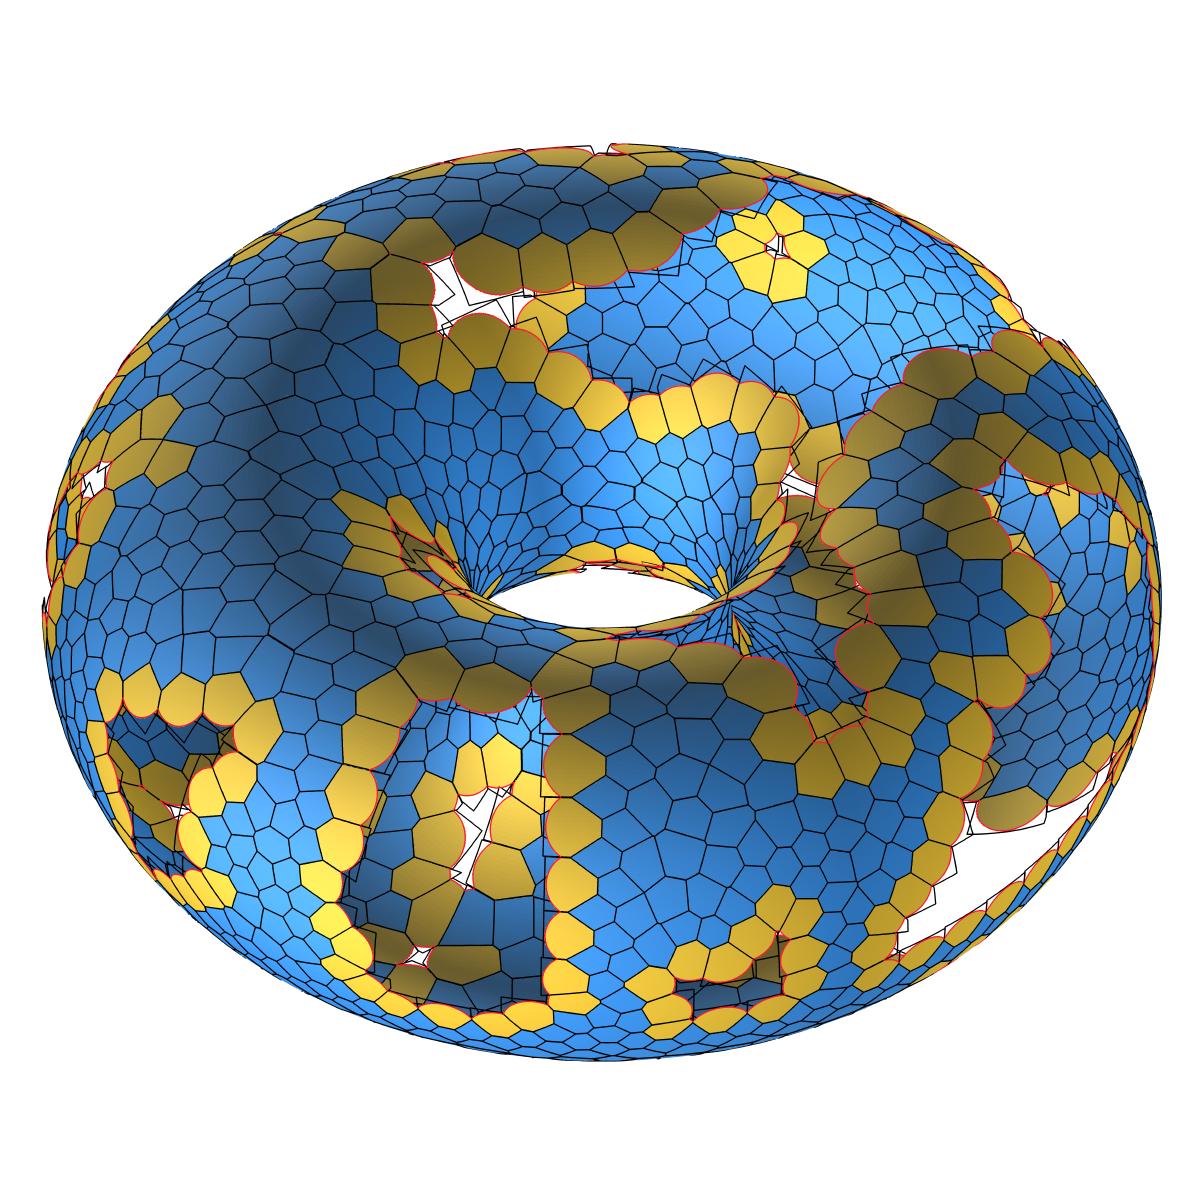 Partially covered torus